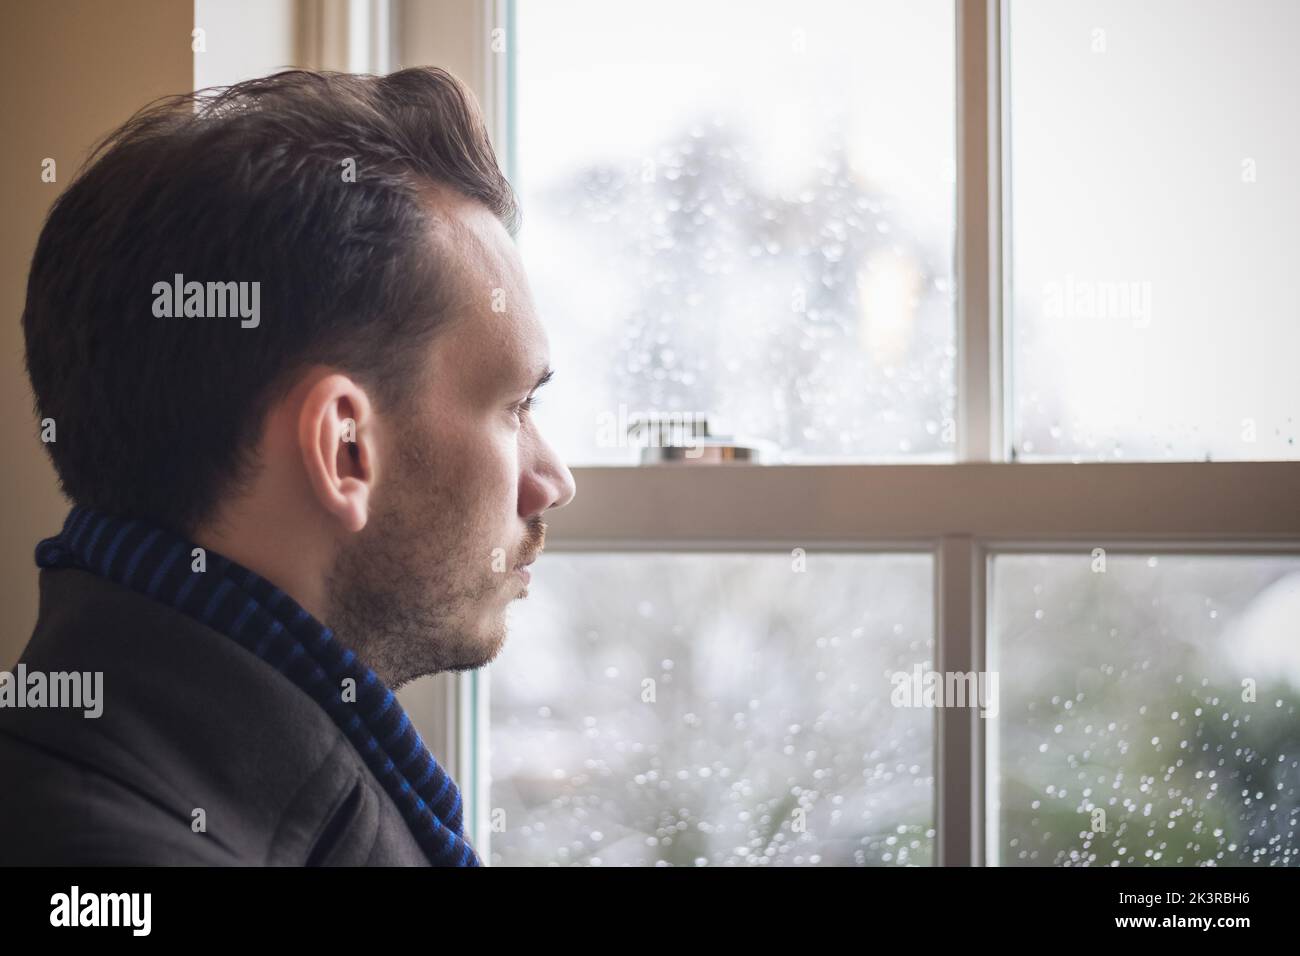 Portrait of a man looking out window Stock Photo